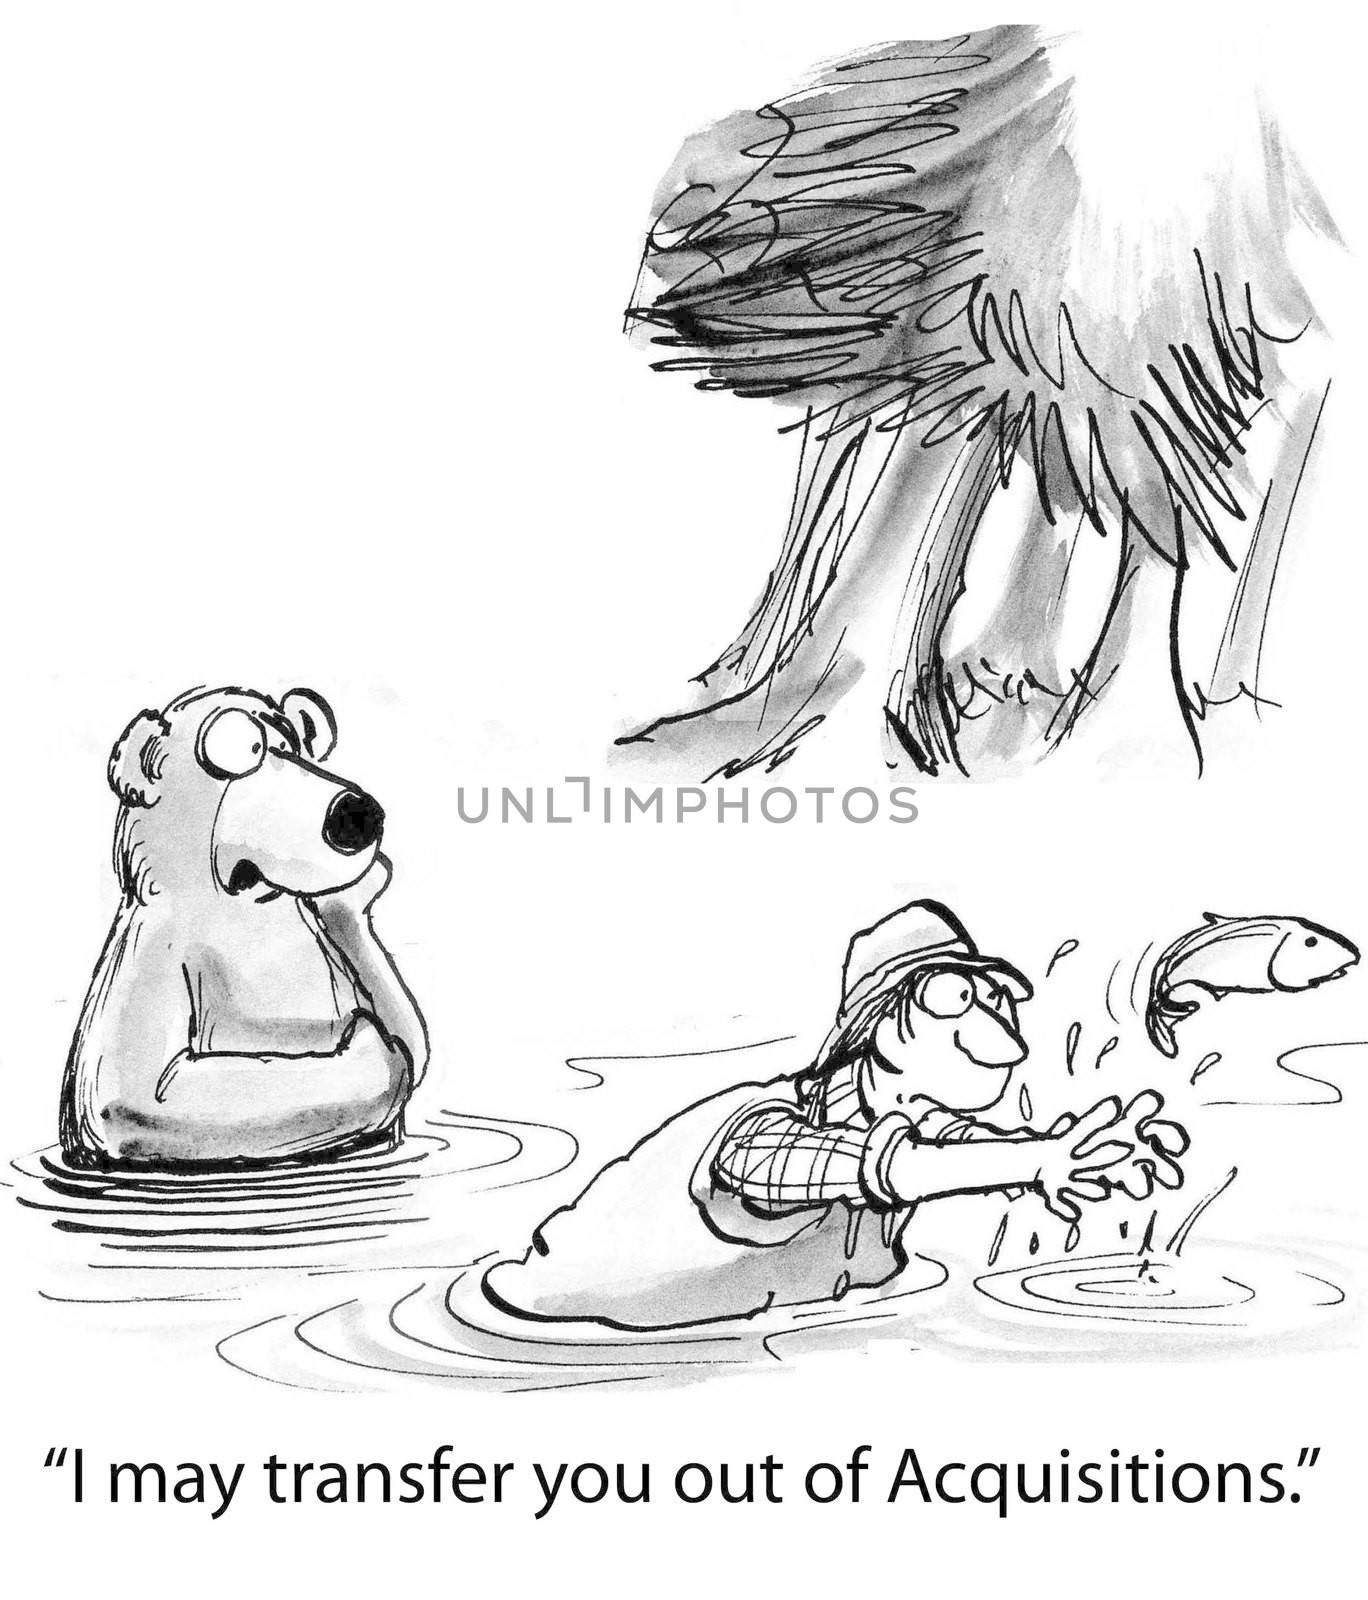 "I may transfer you out of Acquisitions."